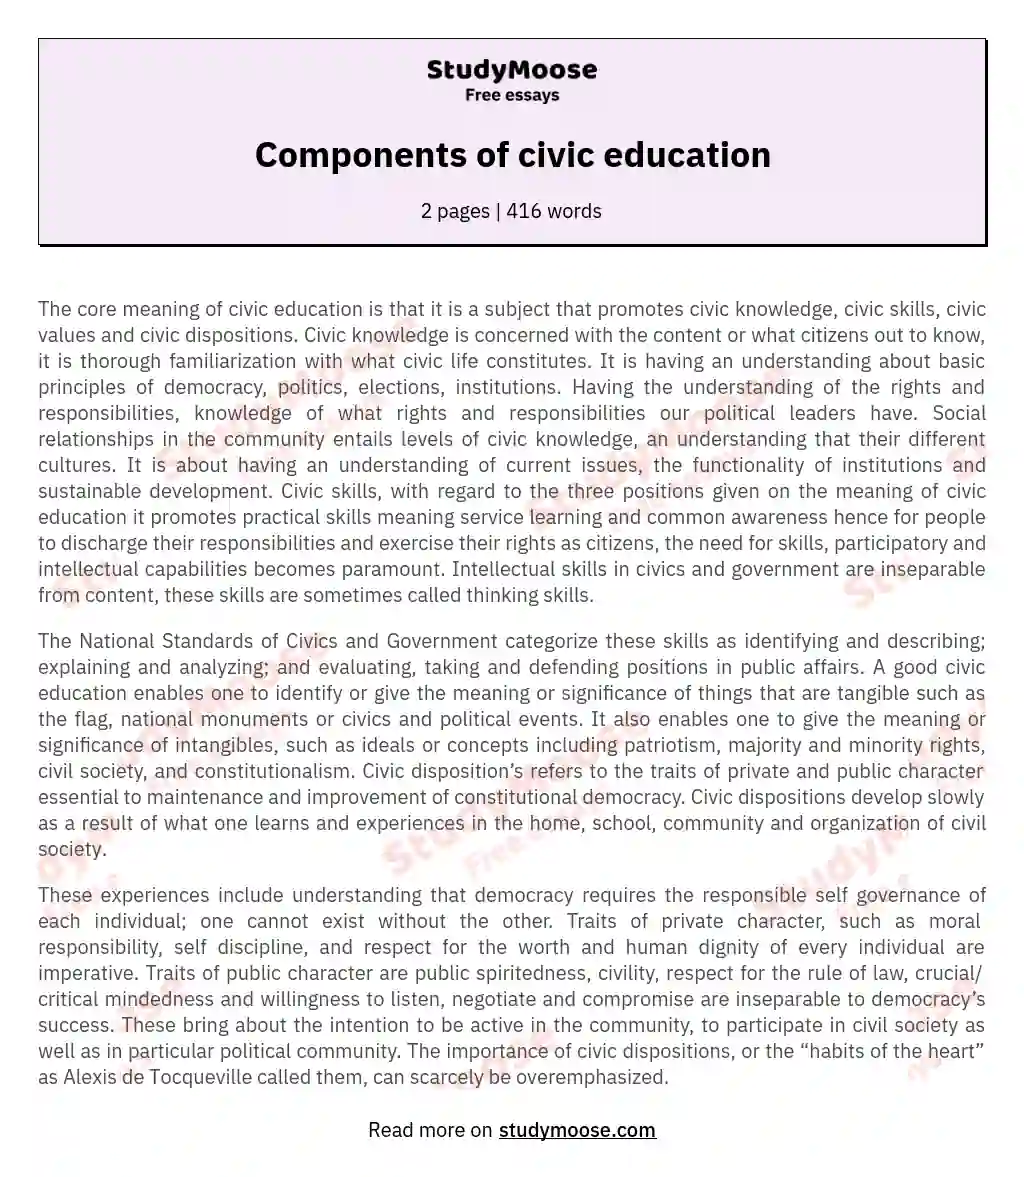 Components of civic education essay